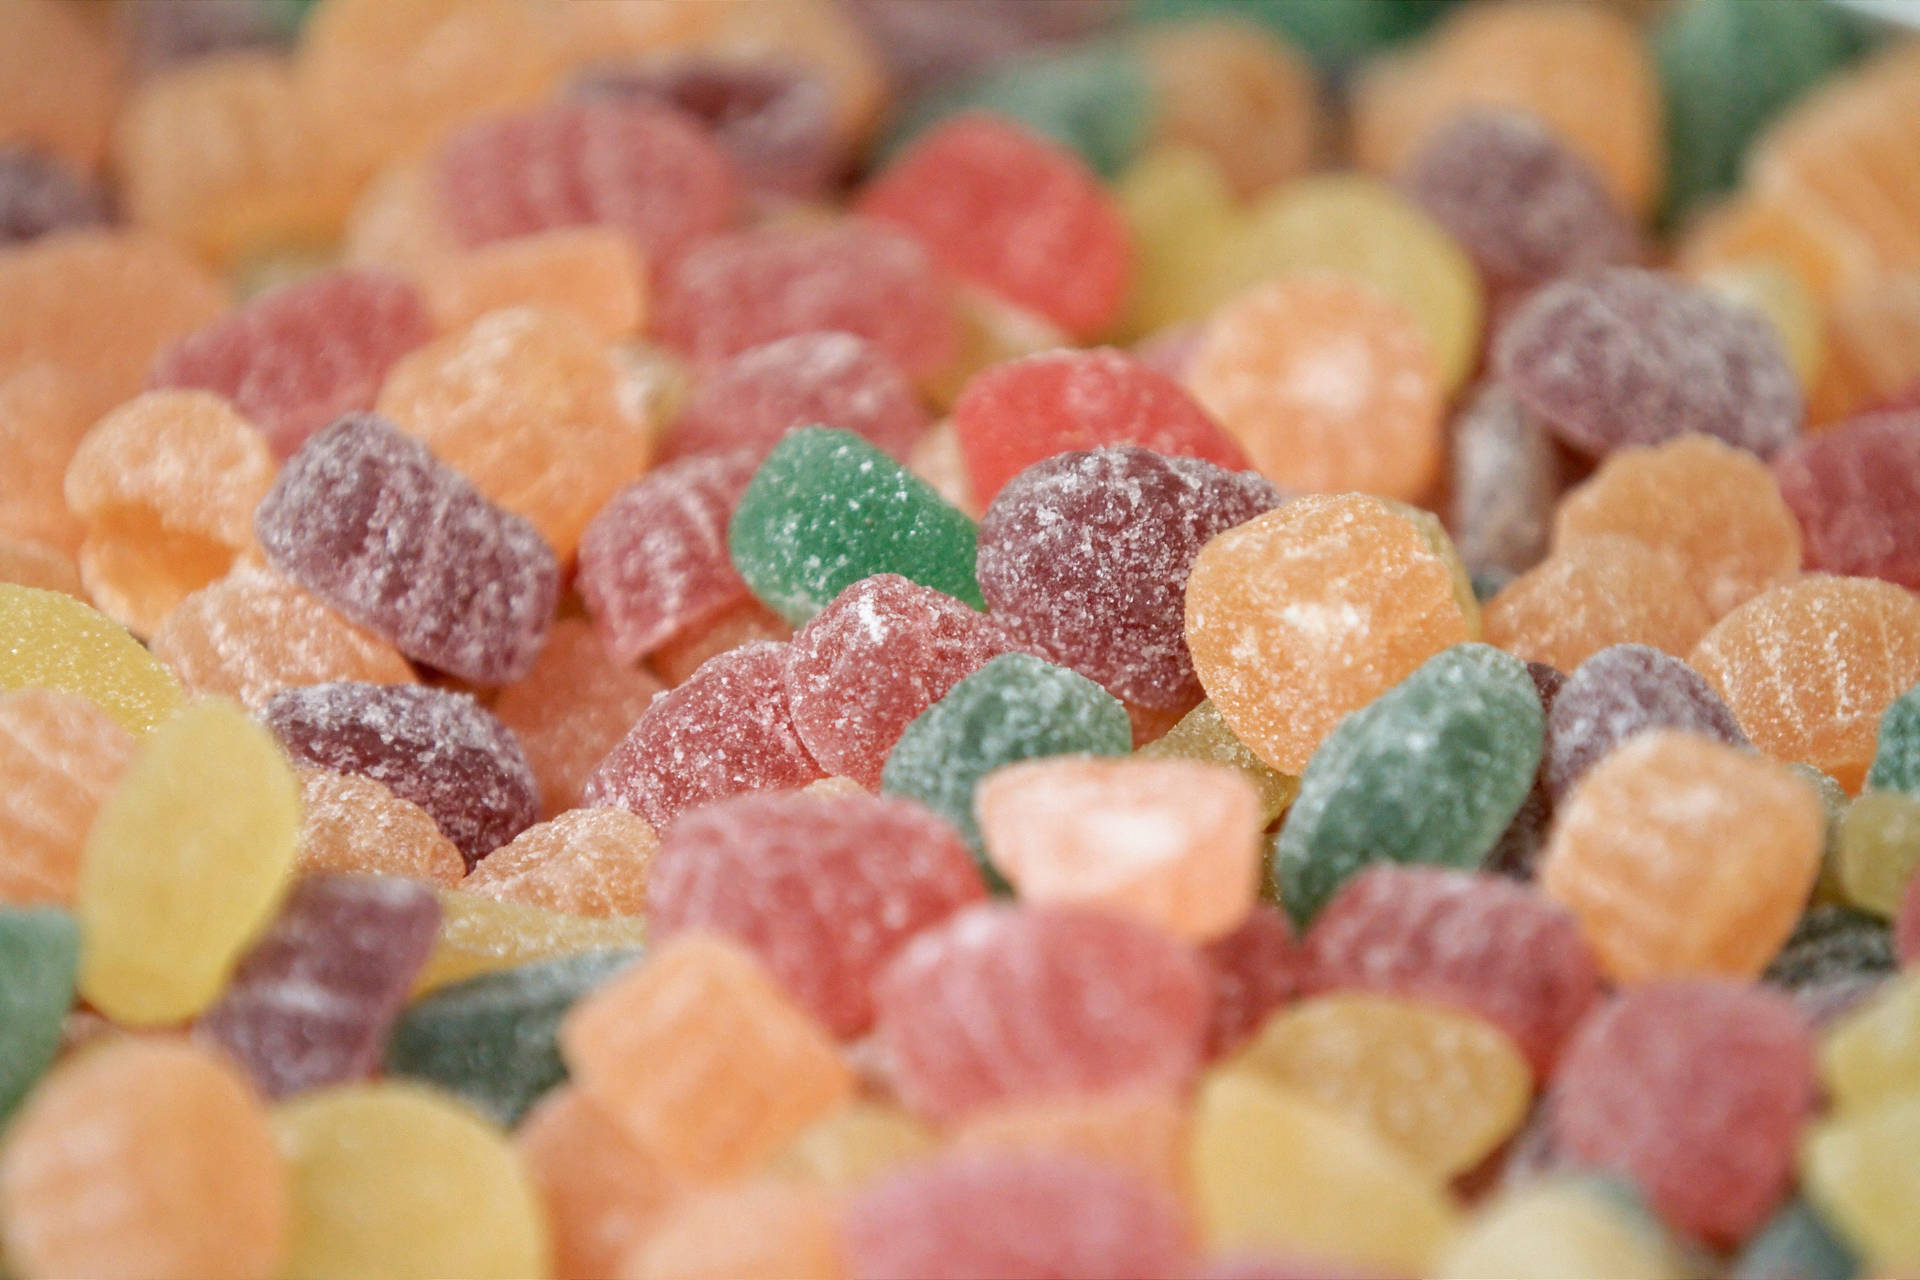 Colorful Coated Chewy Candies Wallpaper